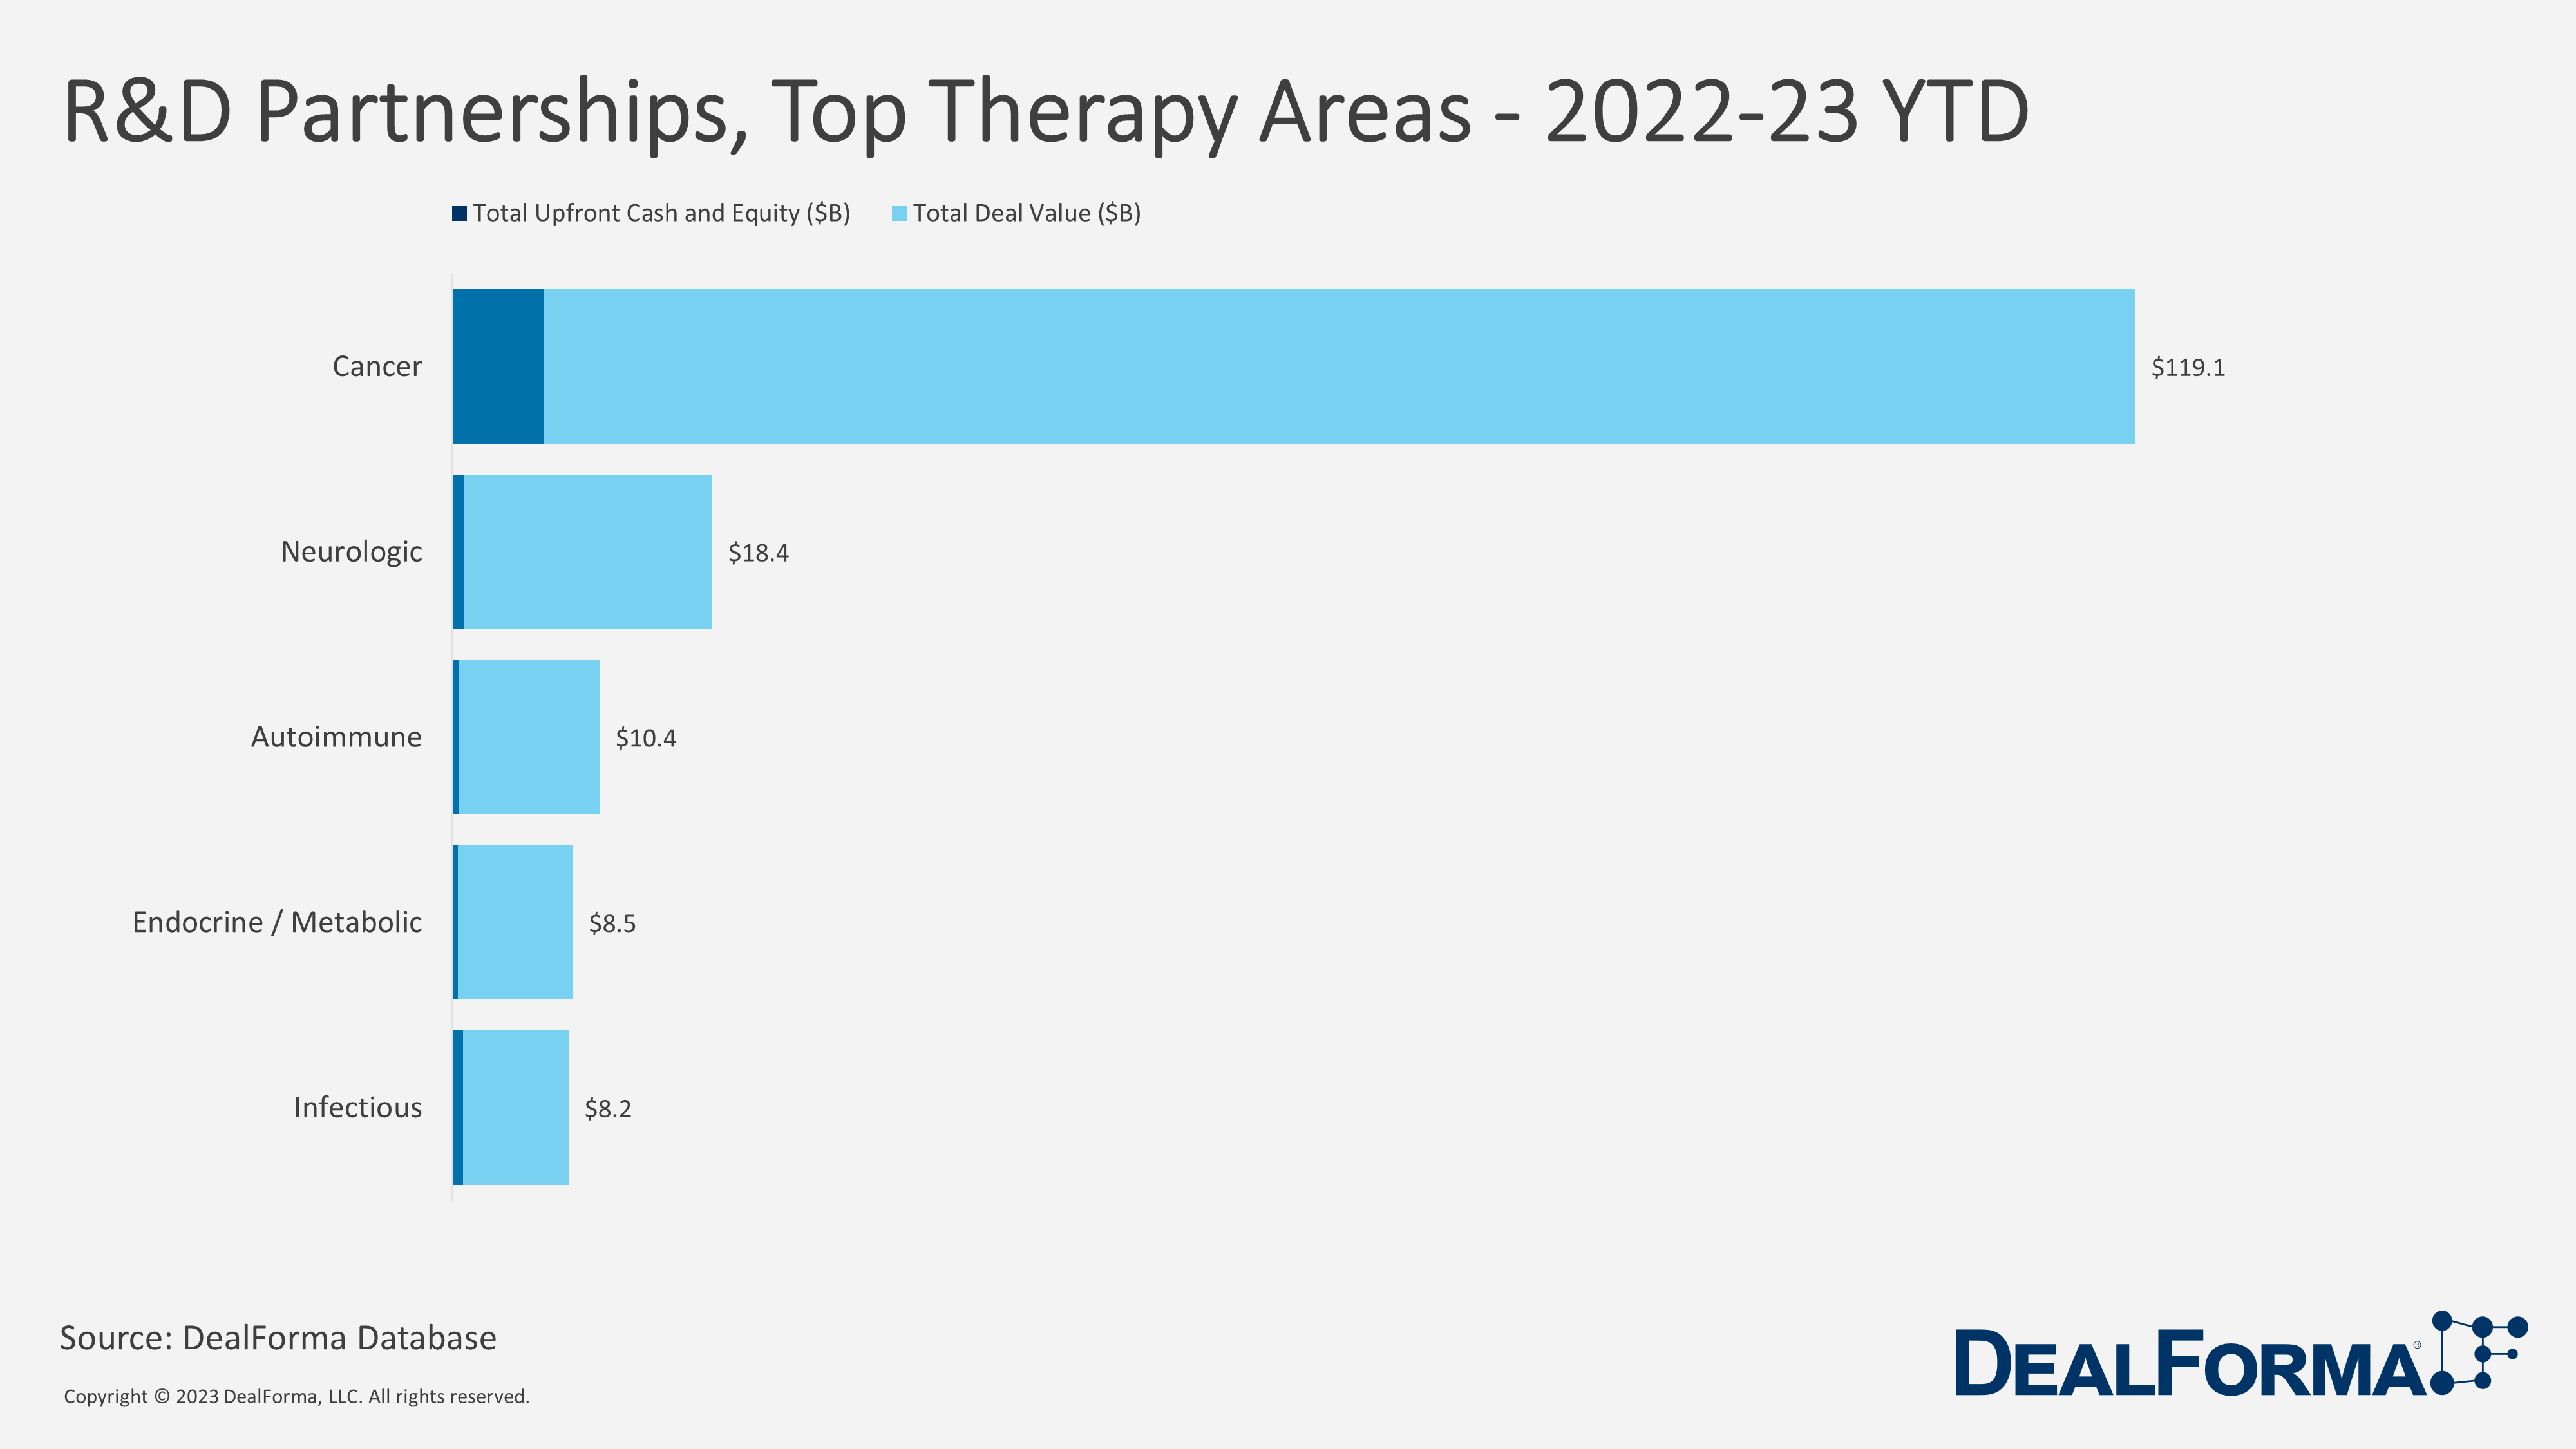 R&D Partnerships, Top Therapy Areas - 2022-23 YTD